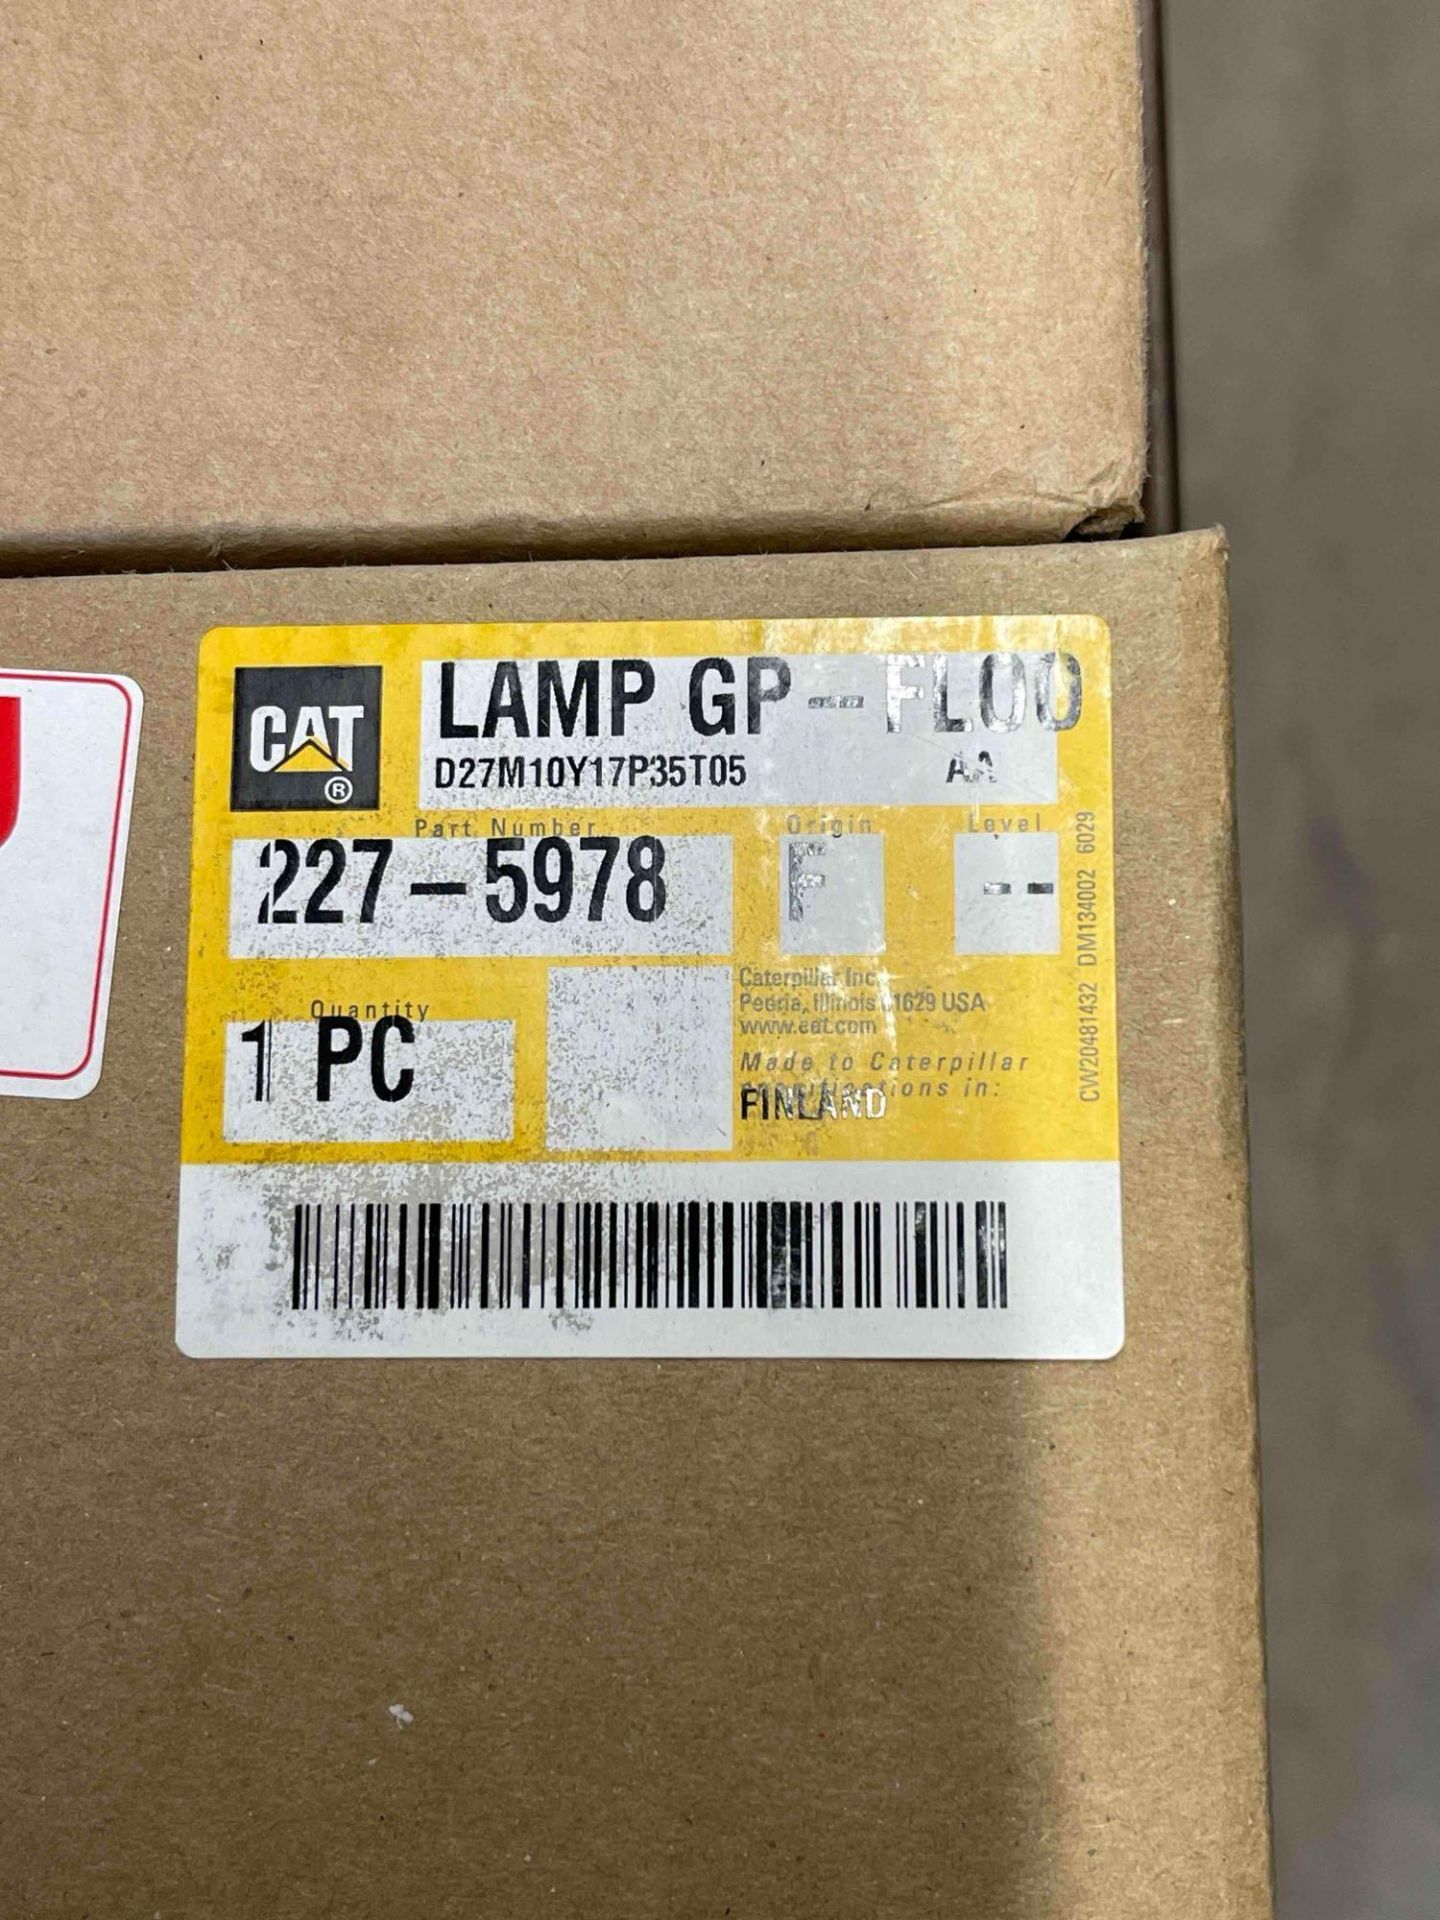 CAT Flood lamps, Circuit Breakers, Gaskets, CAT seats New in Box - Image 22 of 36